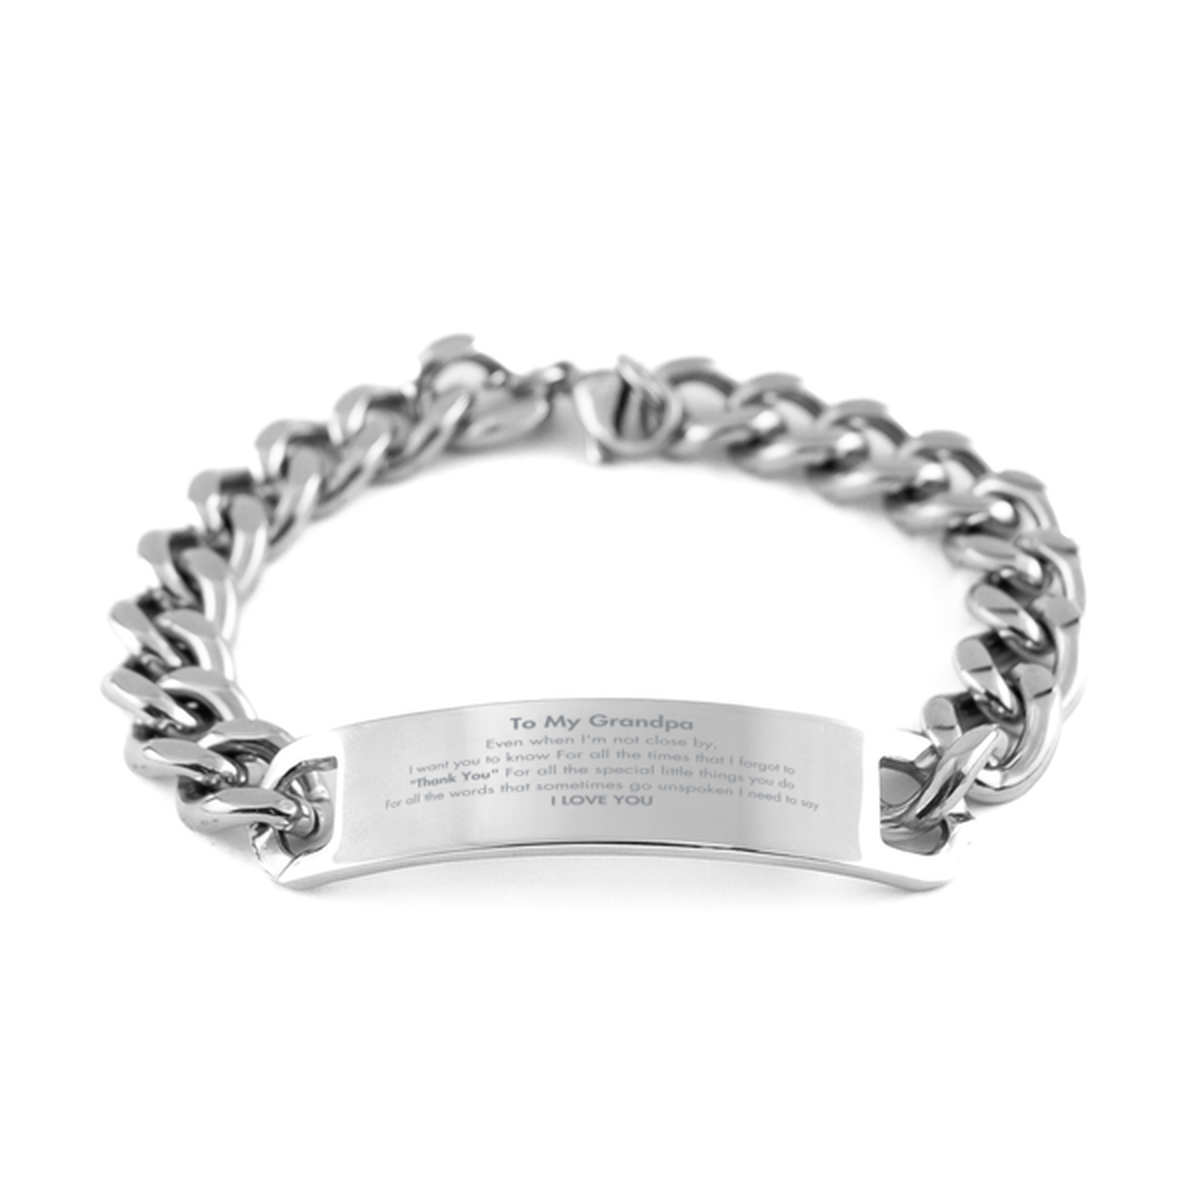 Thank You Gifts for Grandpa, Keepsake Cuban Chain Stainless Steel Bracelet Gifts for Grandpa Birthday Mother's day Father's Day Grandpa For all the words That sometimes go unspoken I need to say I LOVE YOU